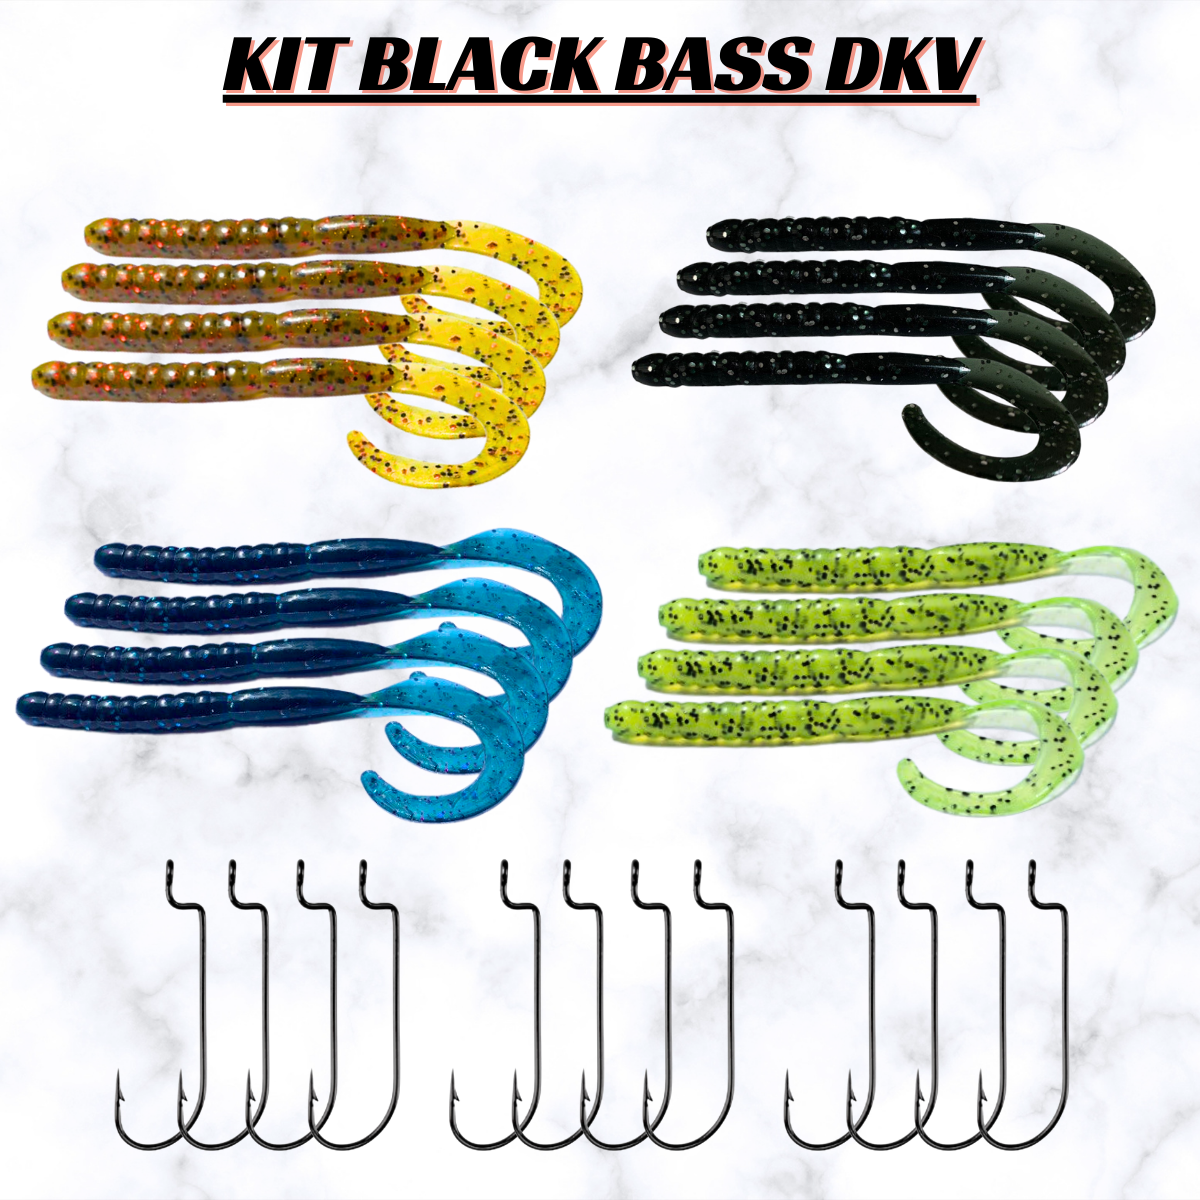 KIT DKV Worm + Anzol Offset Worm